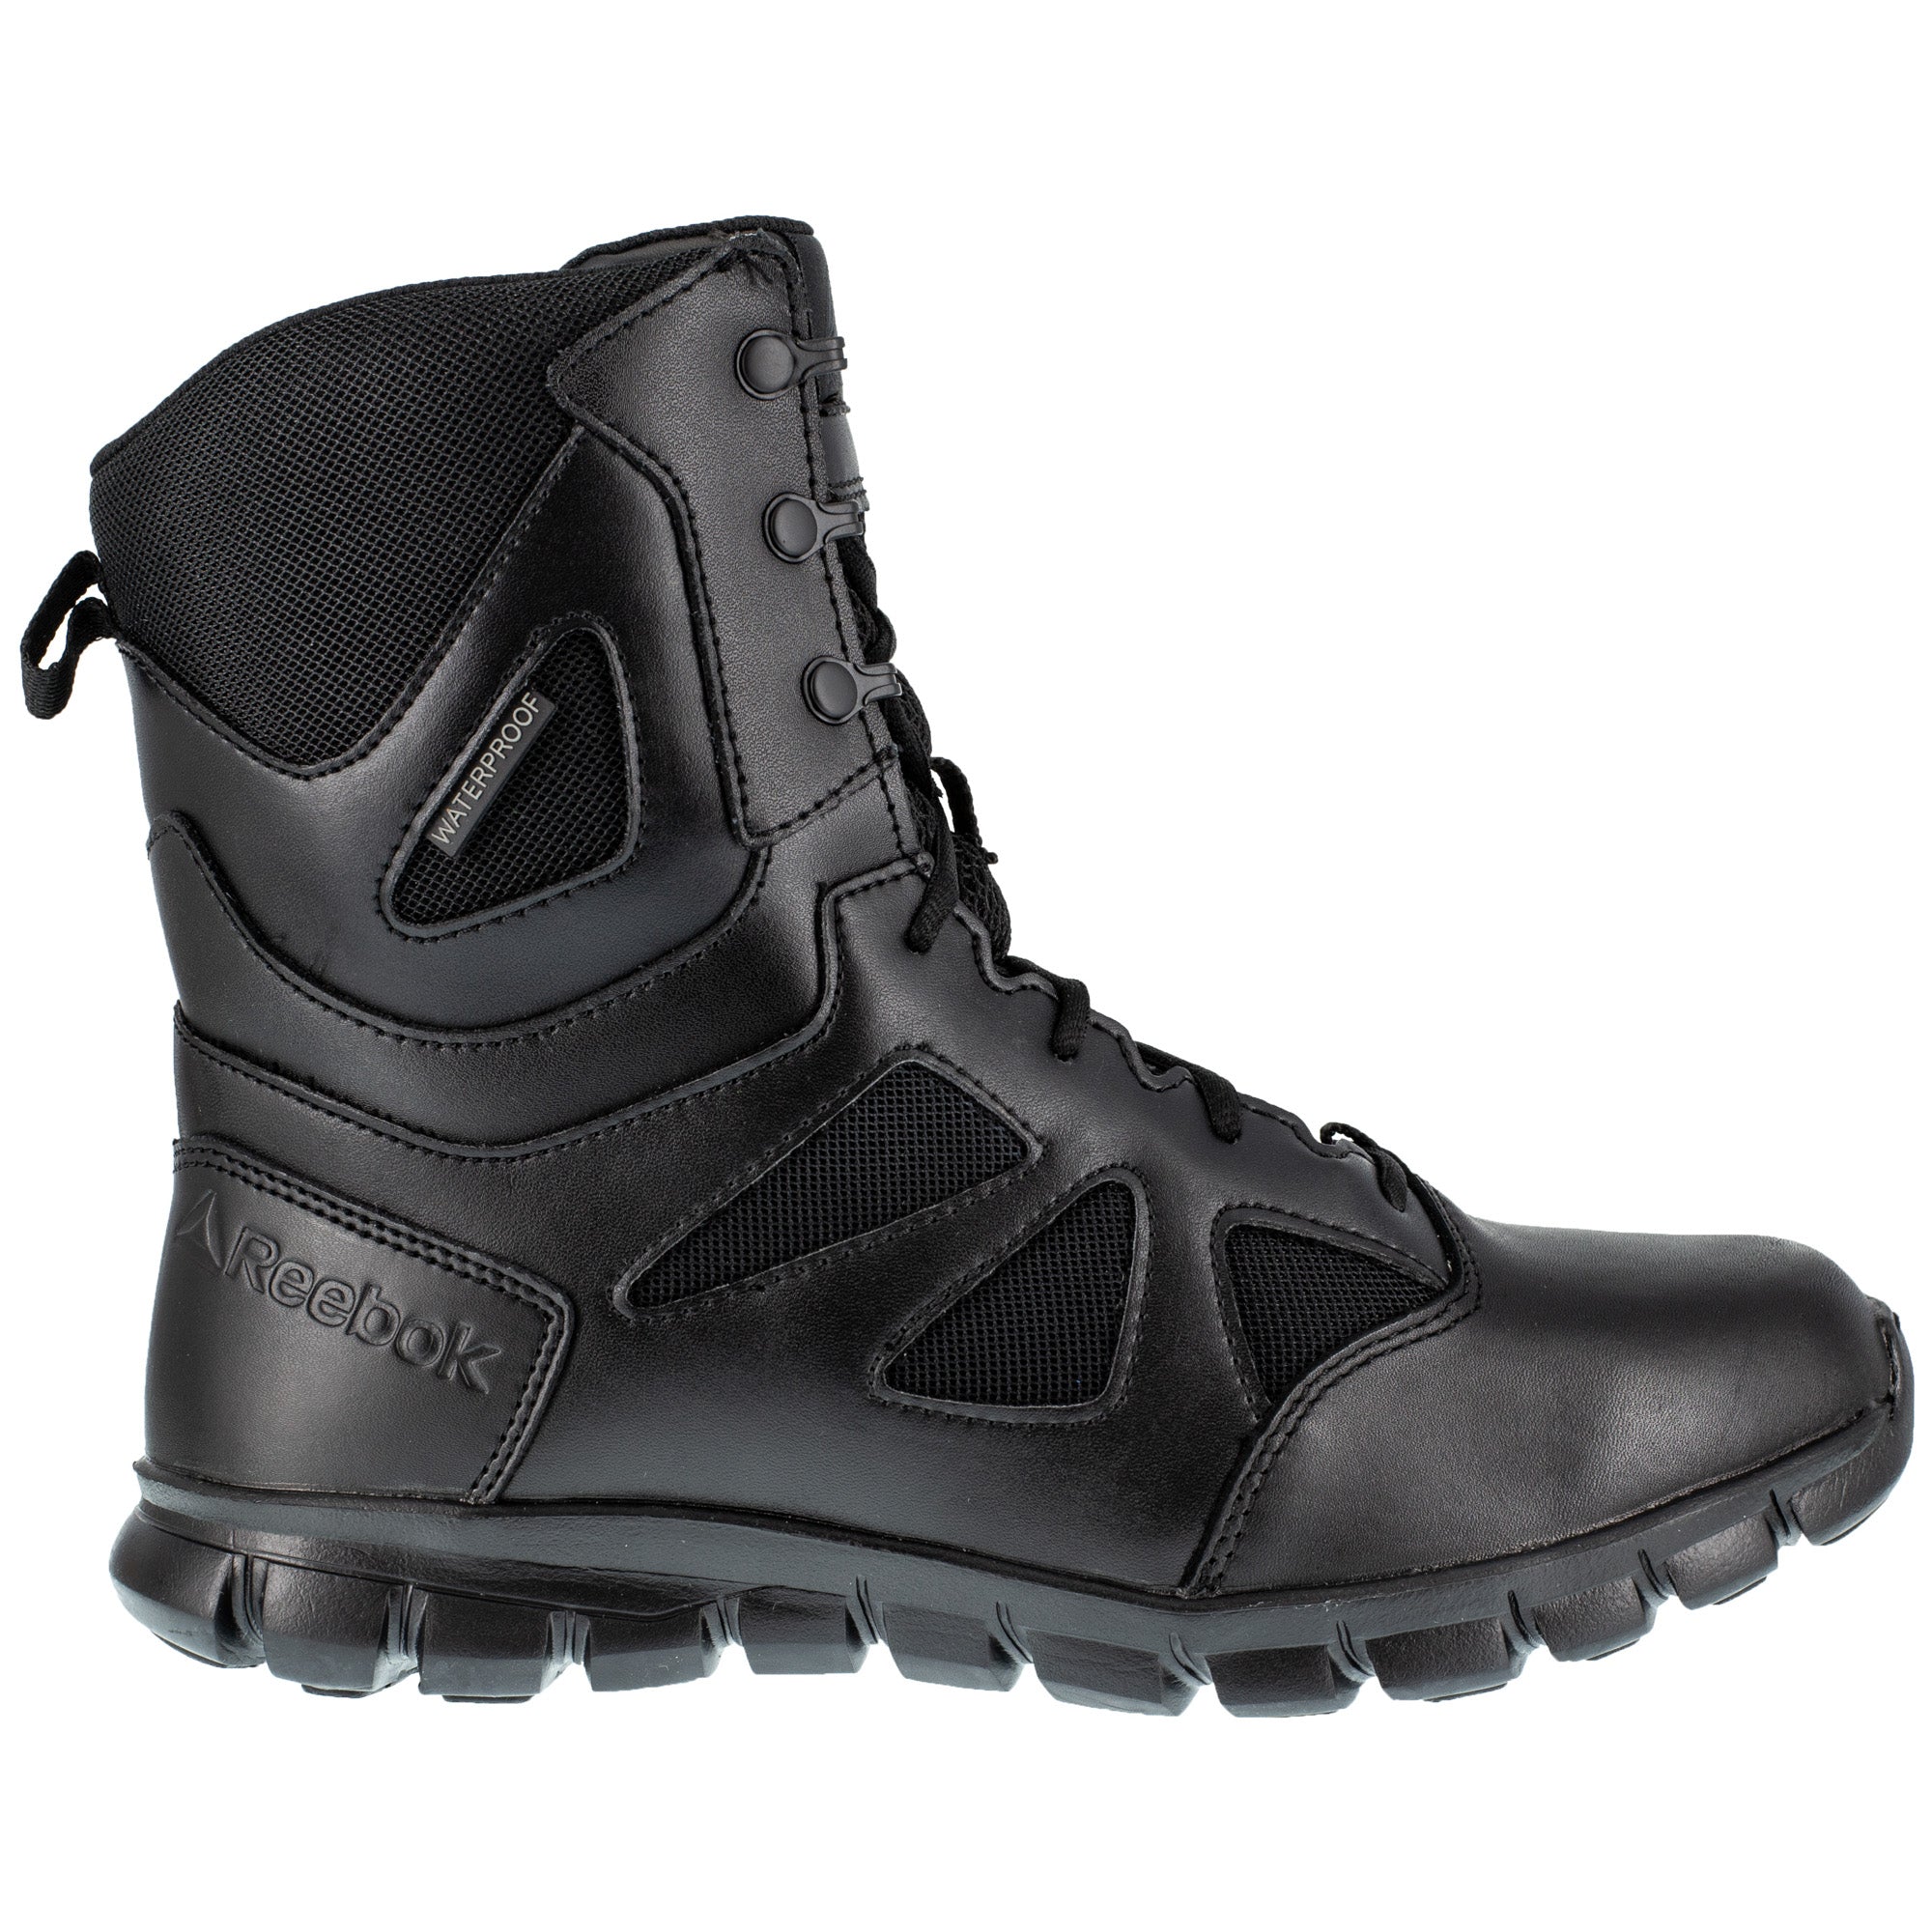 Reebok Womens Leather Work Boots Tactical – The Western Company